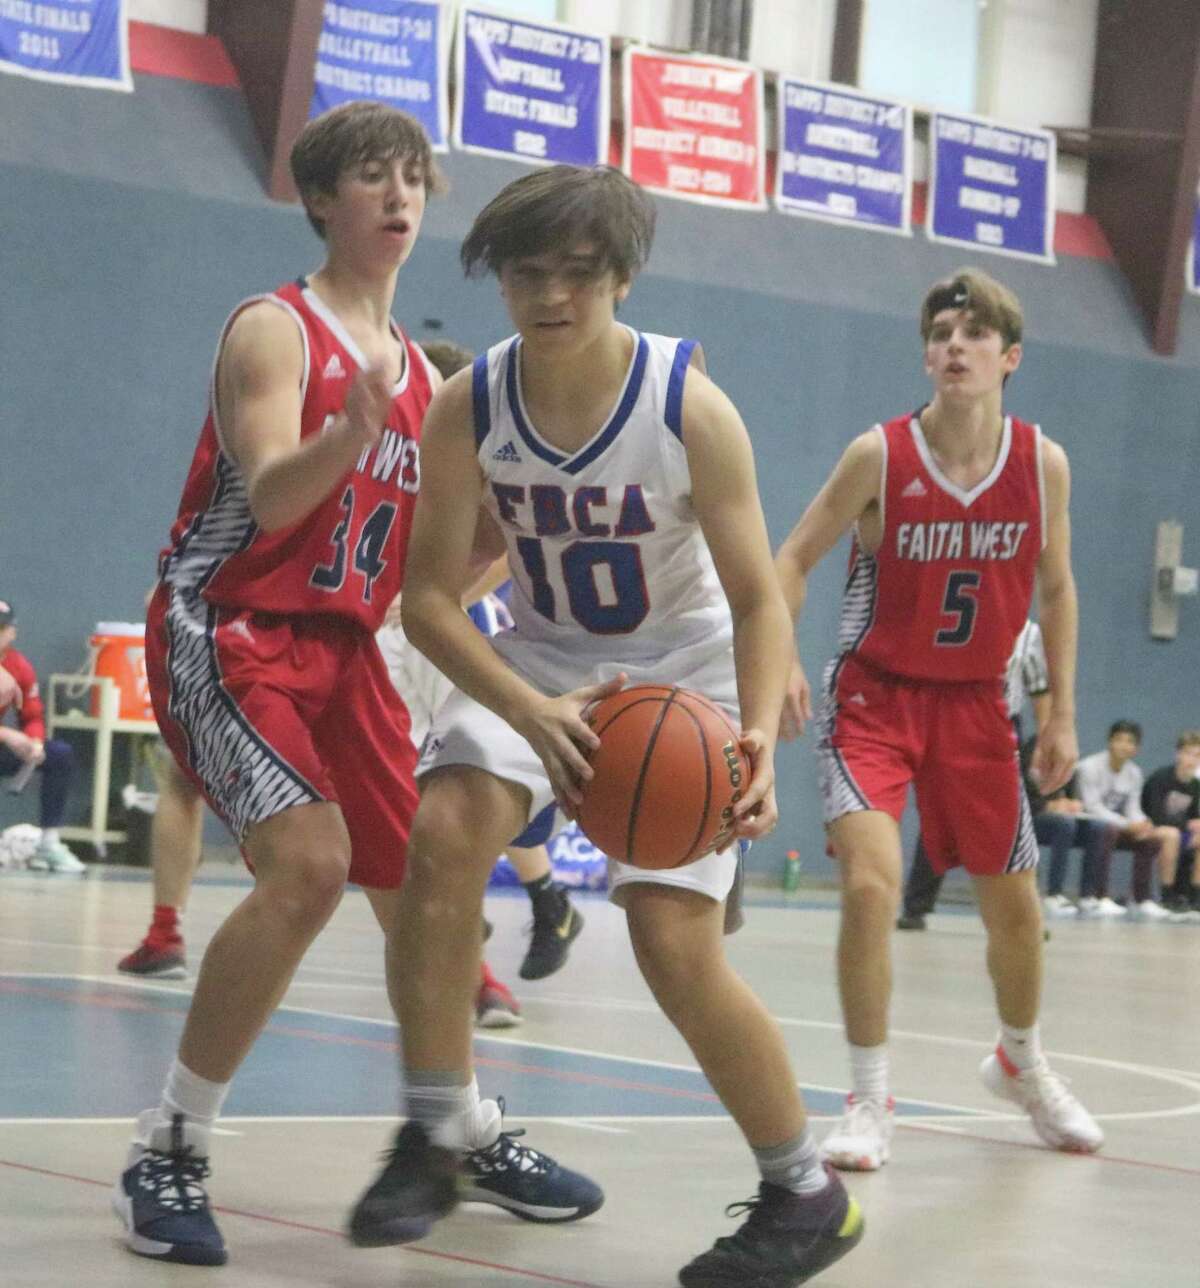 End-of-game play unable to rescue FBCA in 55-54 defeat